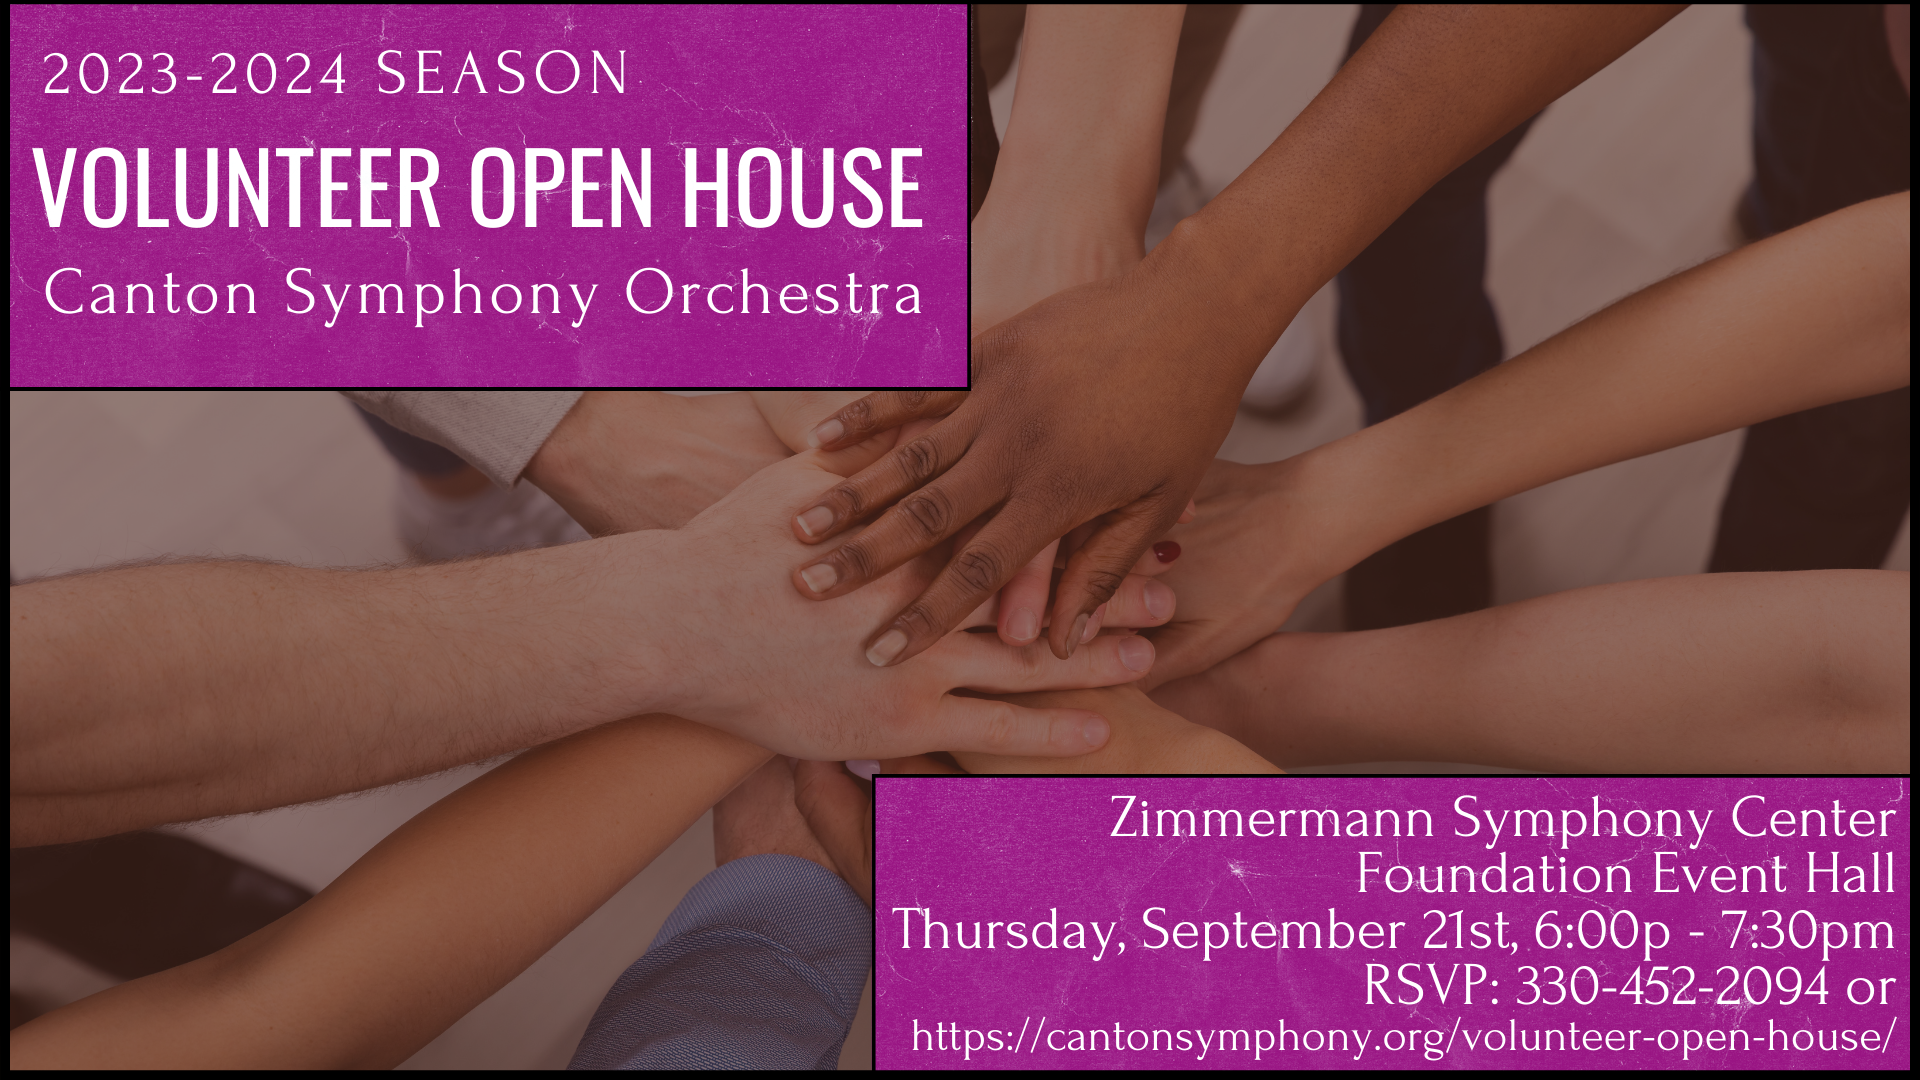 Graphic depicting information for the CSO Volunteer Open House on September 21st.